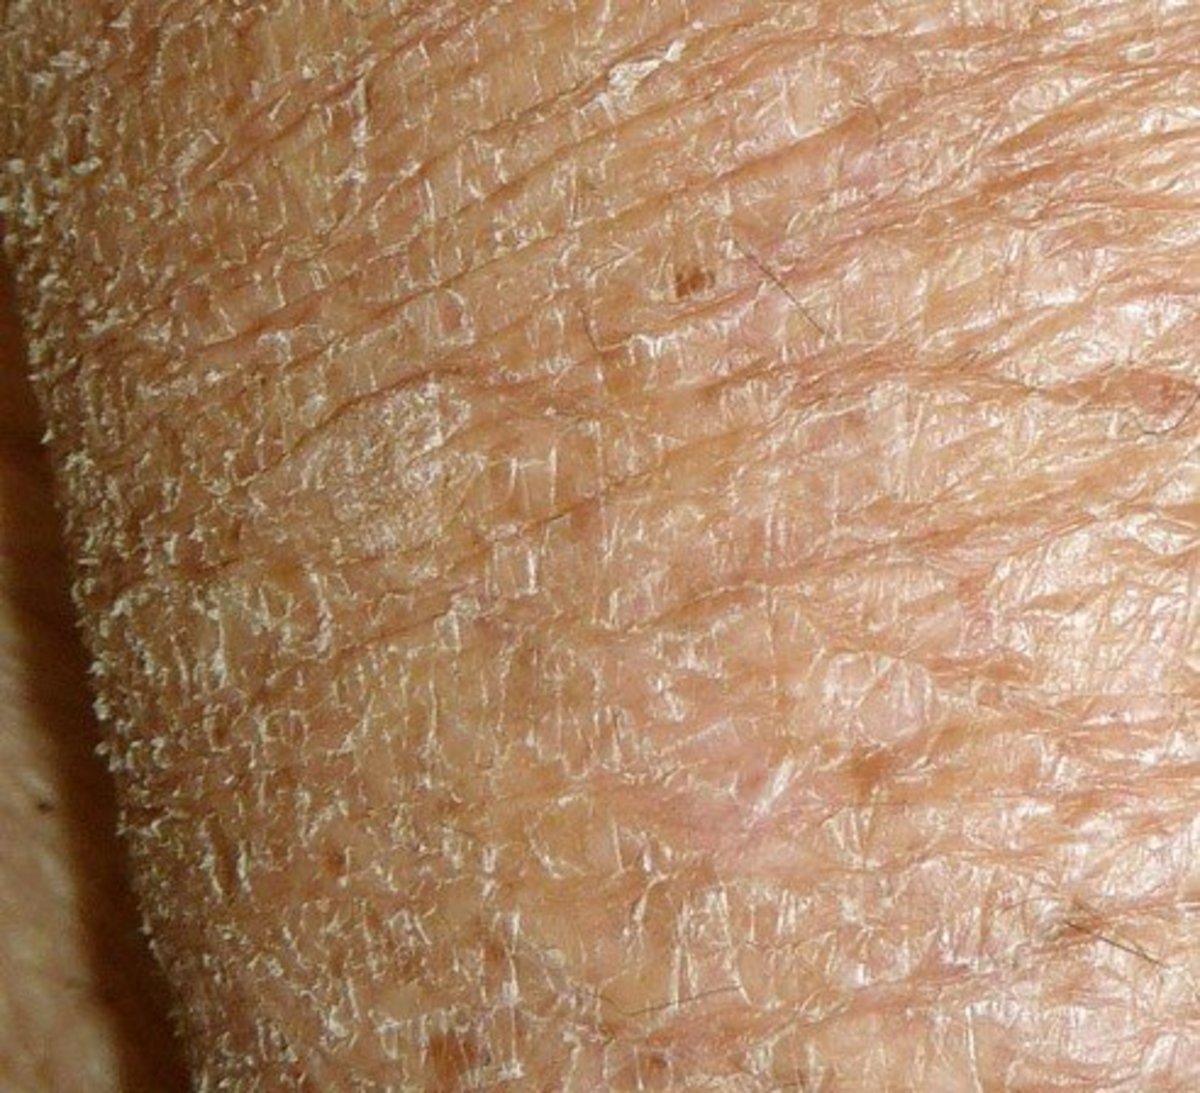 Xerosis - Definition, Pictures, Treatment, Symptoms and Causes